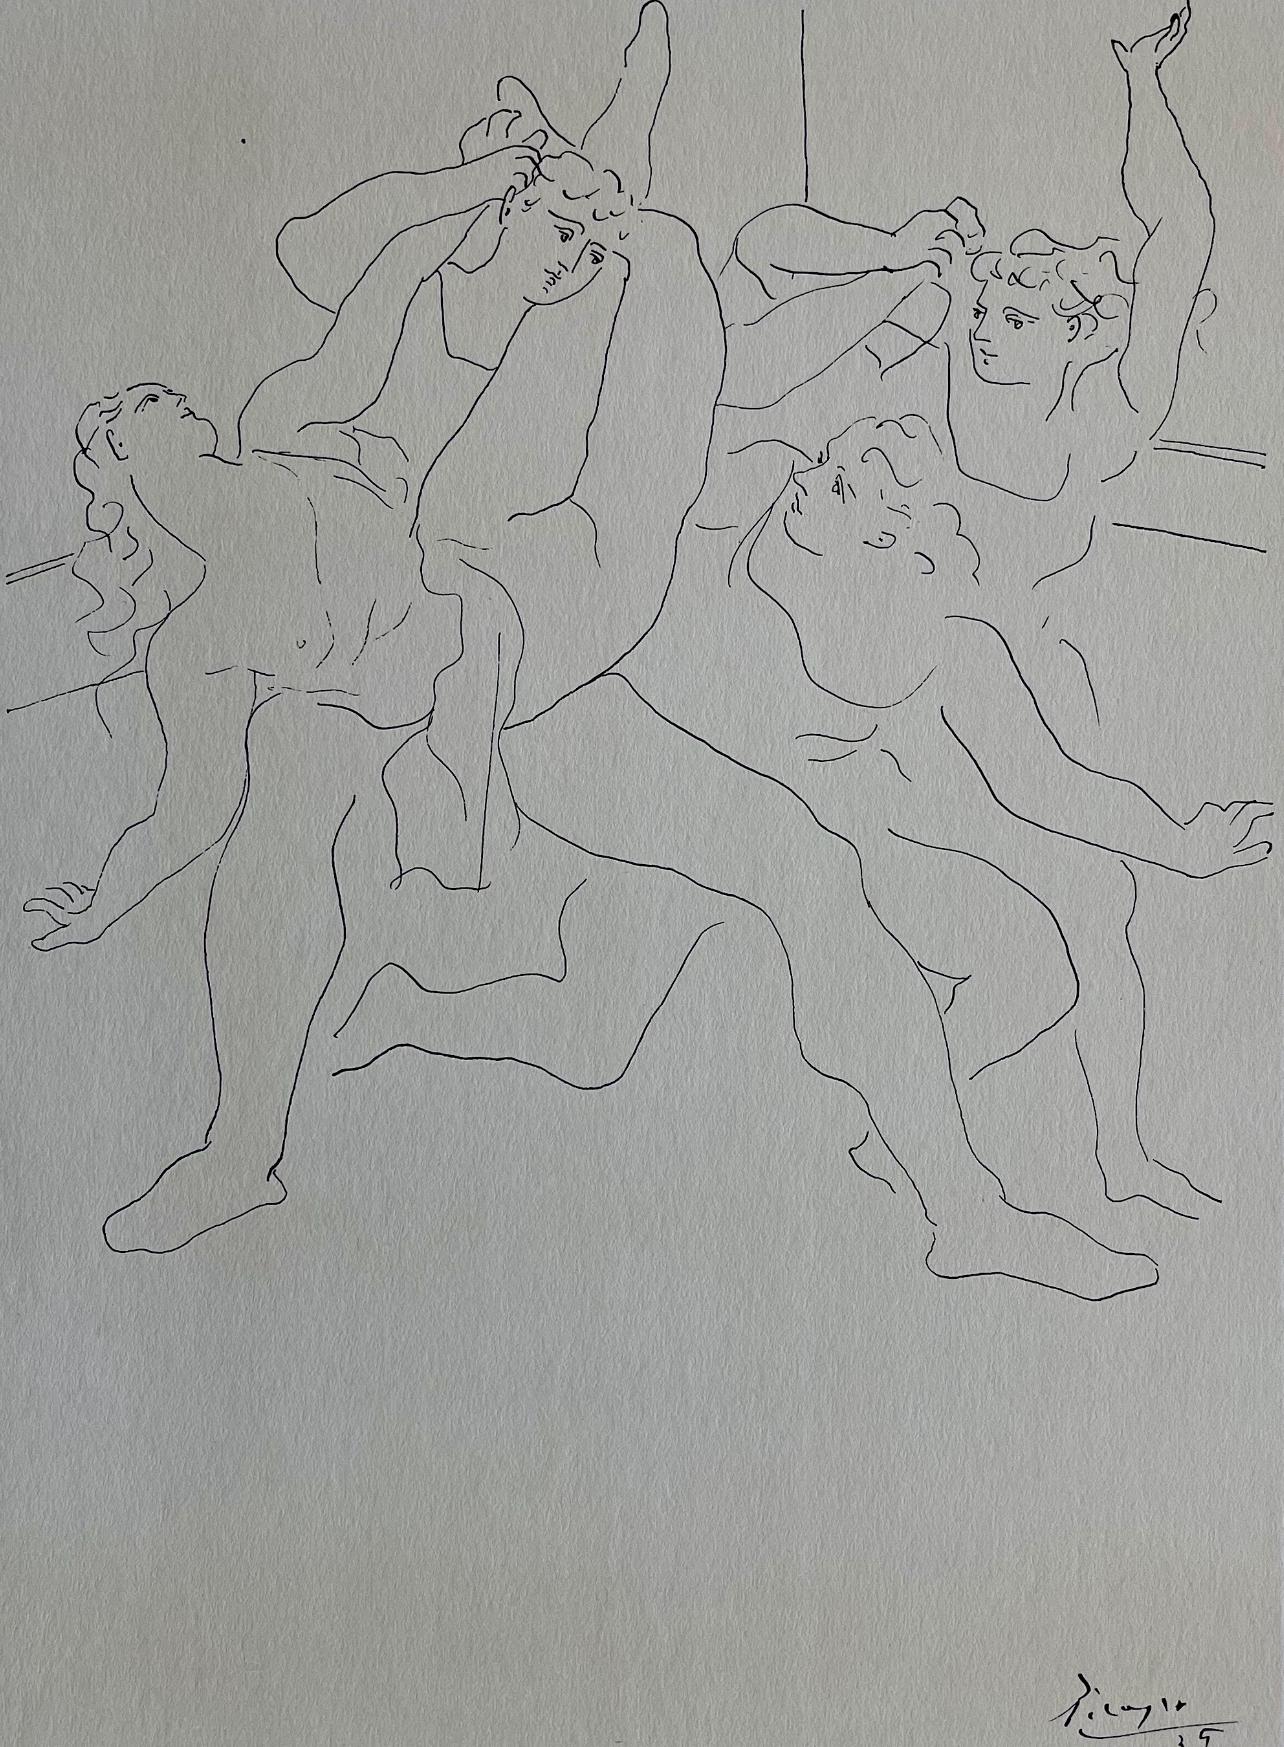 Pablo Picasso Abstract Print - Picasso, Four Ballet Dancers, Picasso: Fifteen Drawings (after)